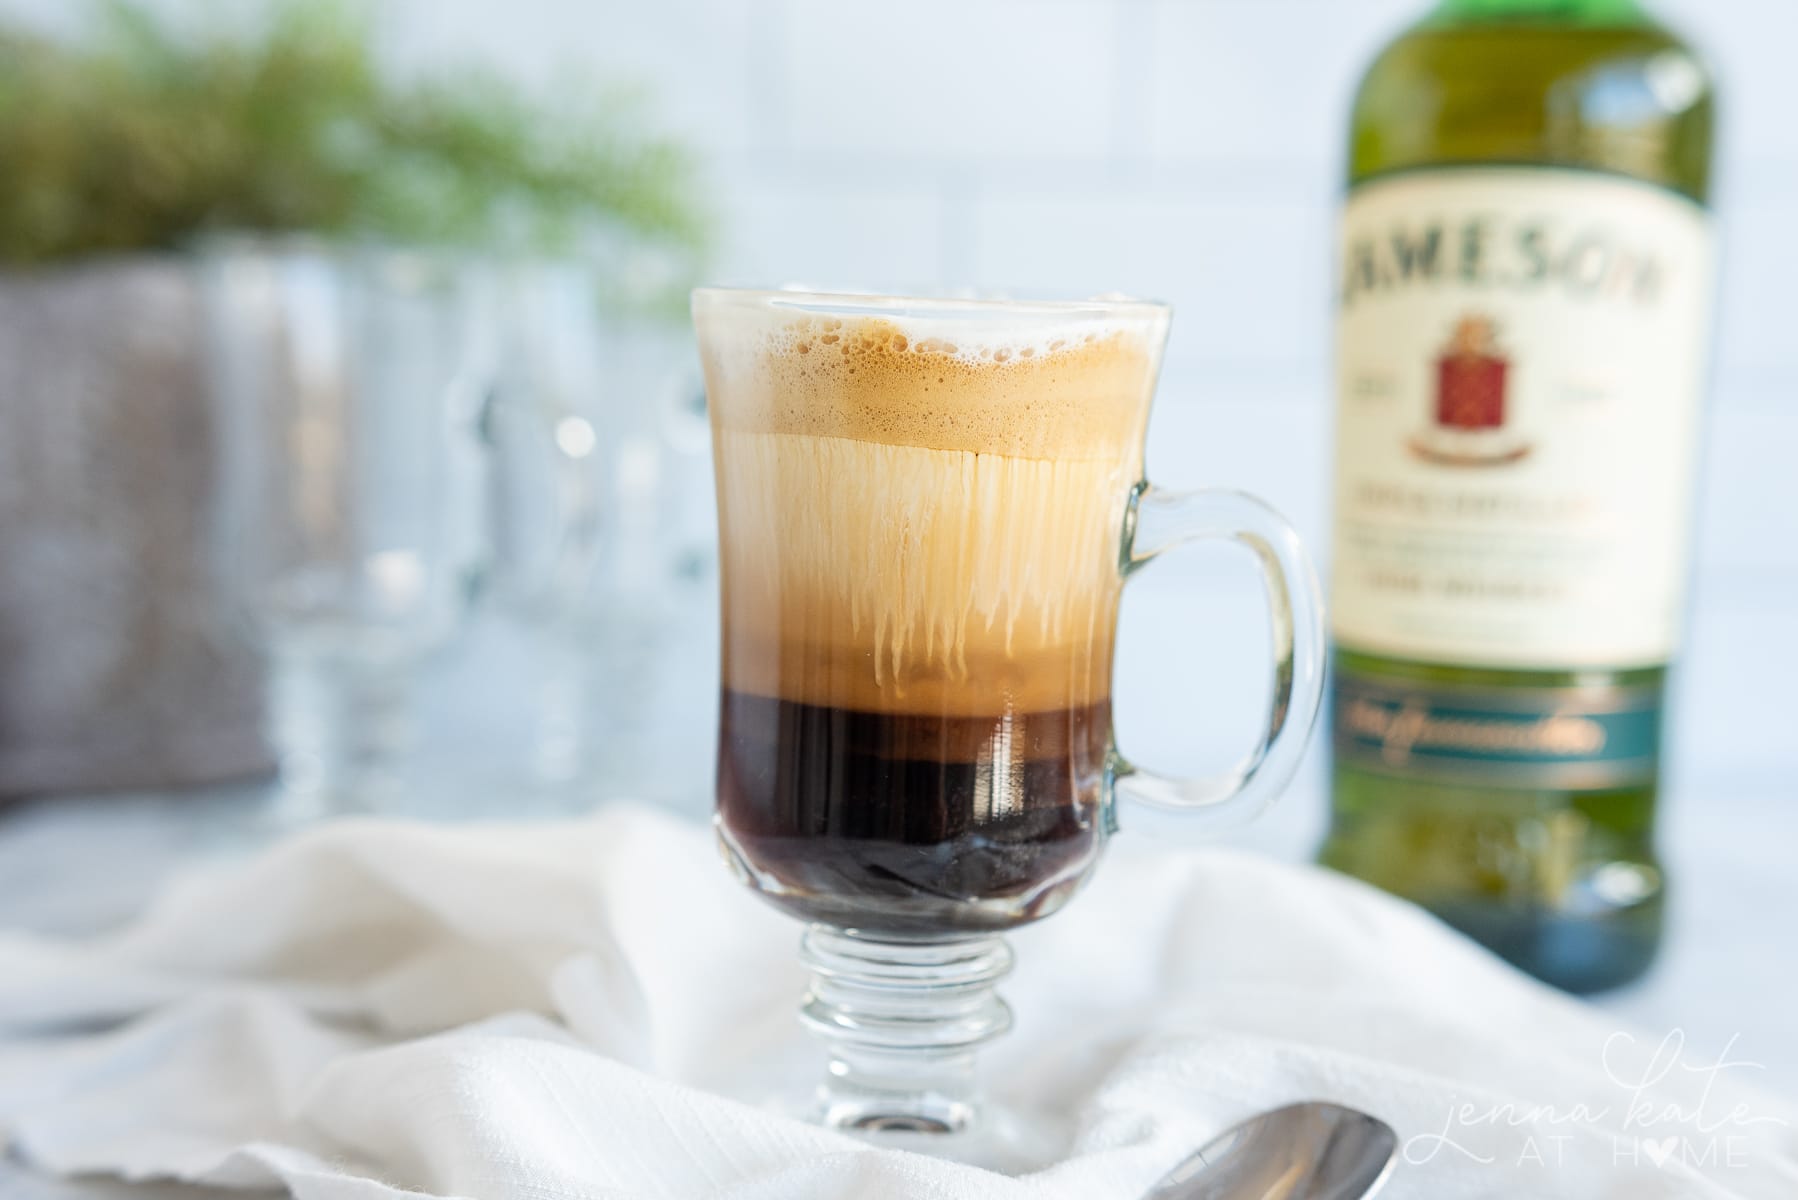 Glass of Irish coffee with a bottle of Jameson Irish whiskey in the background